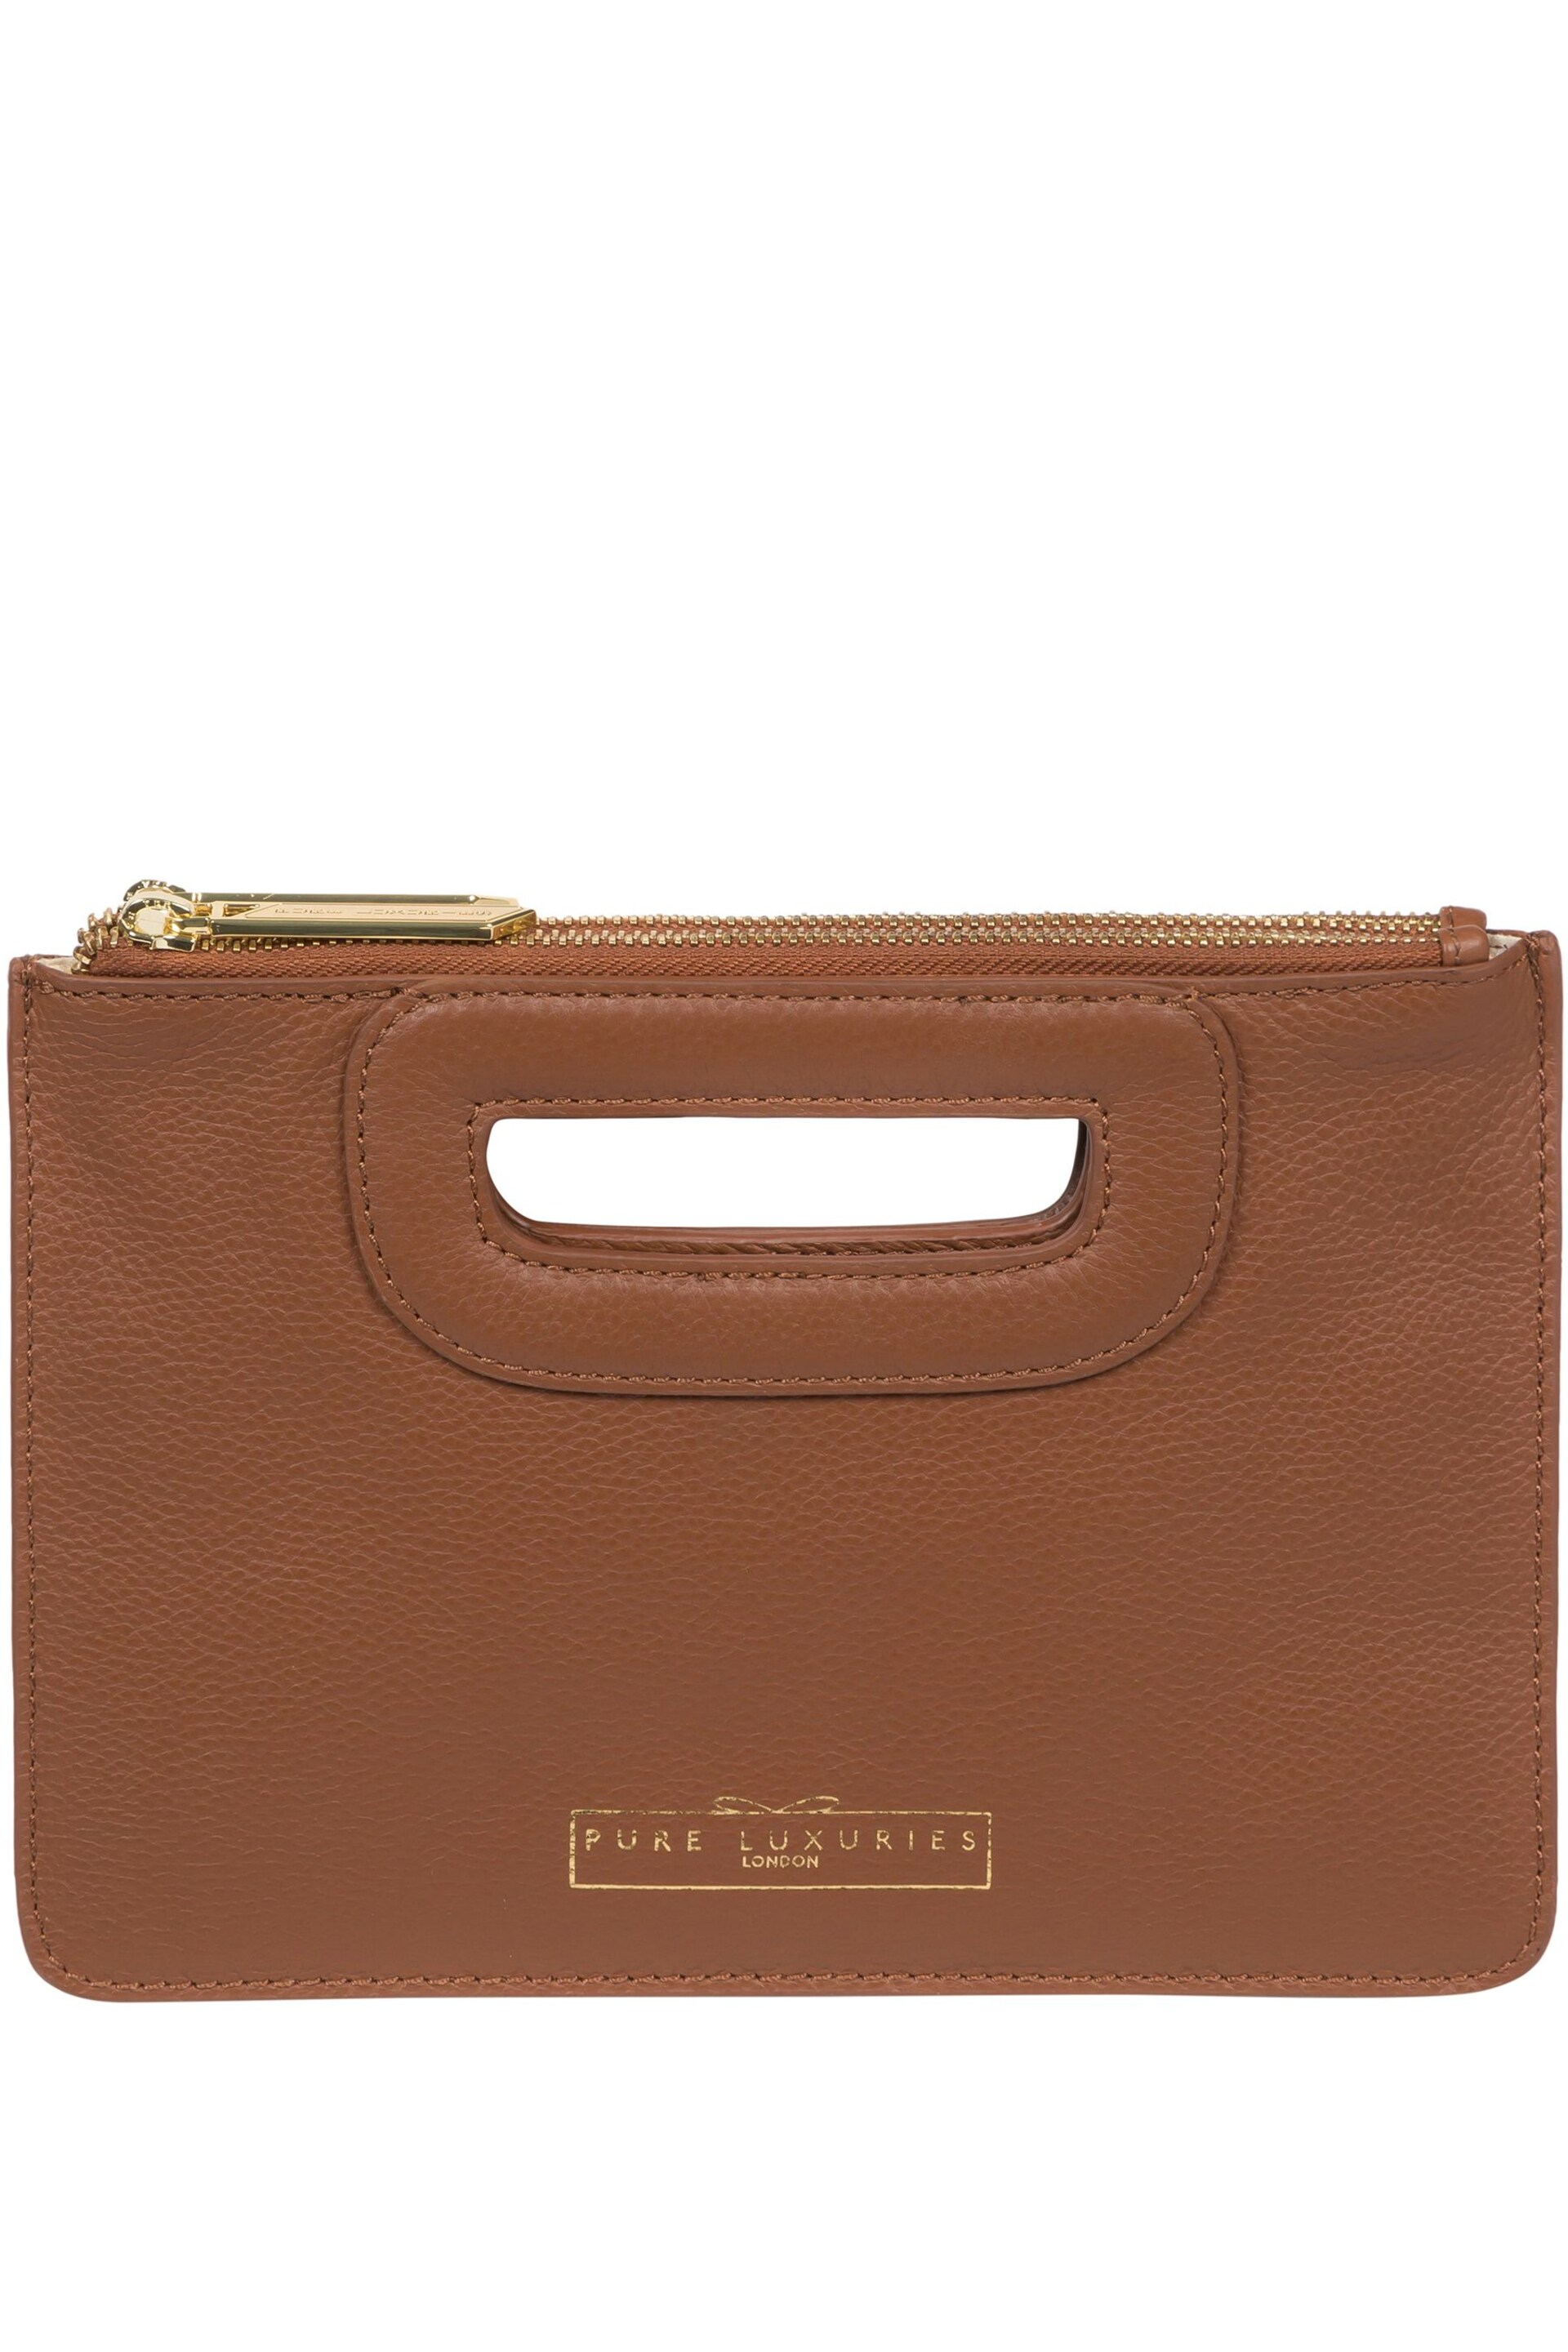 Pure Luxuries London Esher Leather Clutch Bag - Image 1 of 5